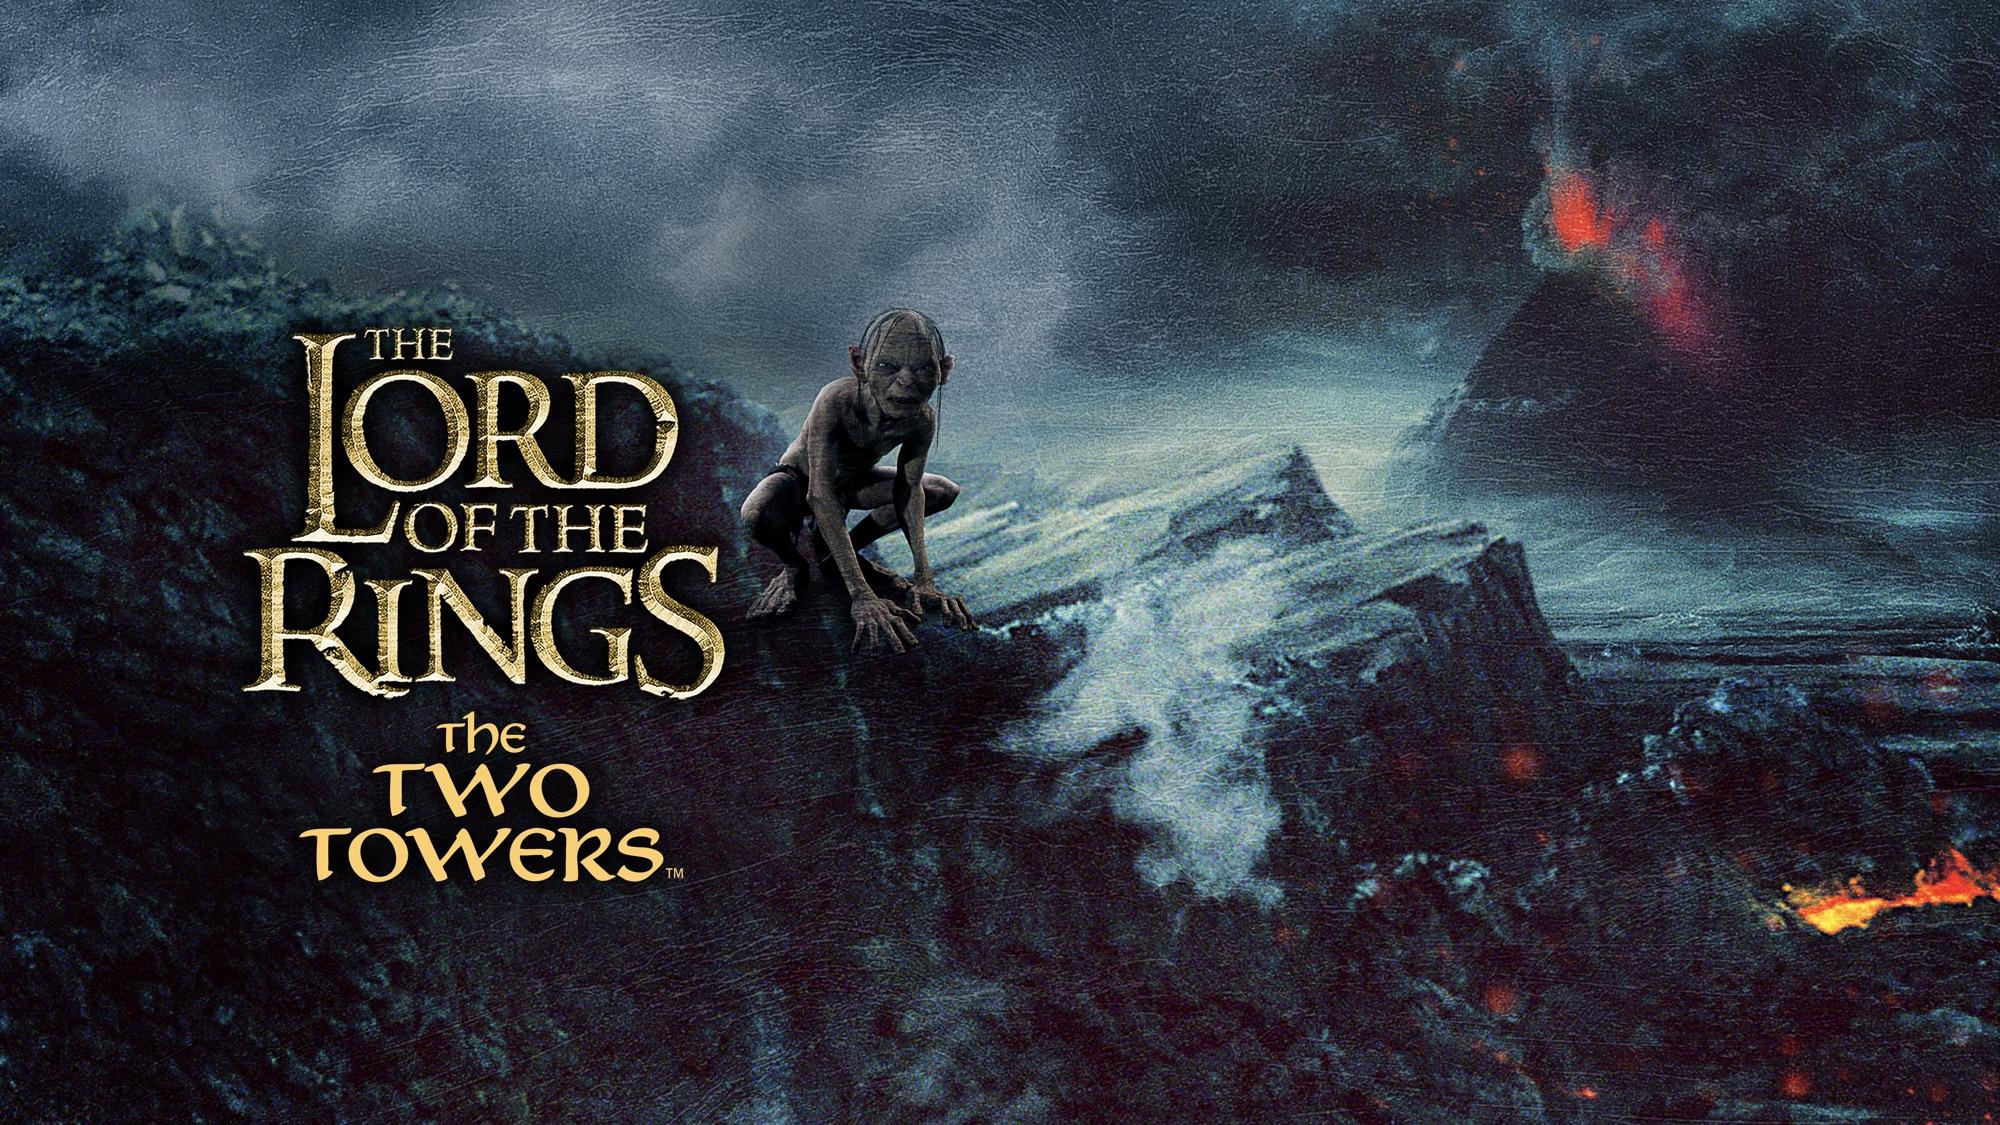 The Lord of the Rings: The Two Towers free downloads